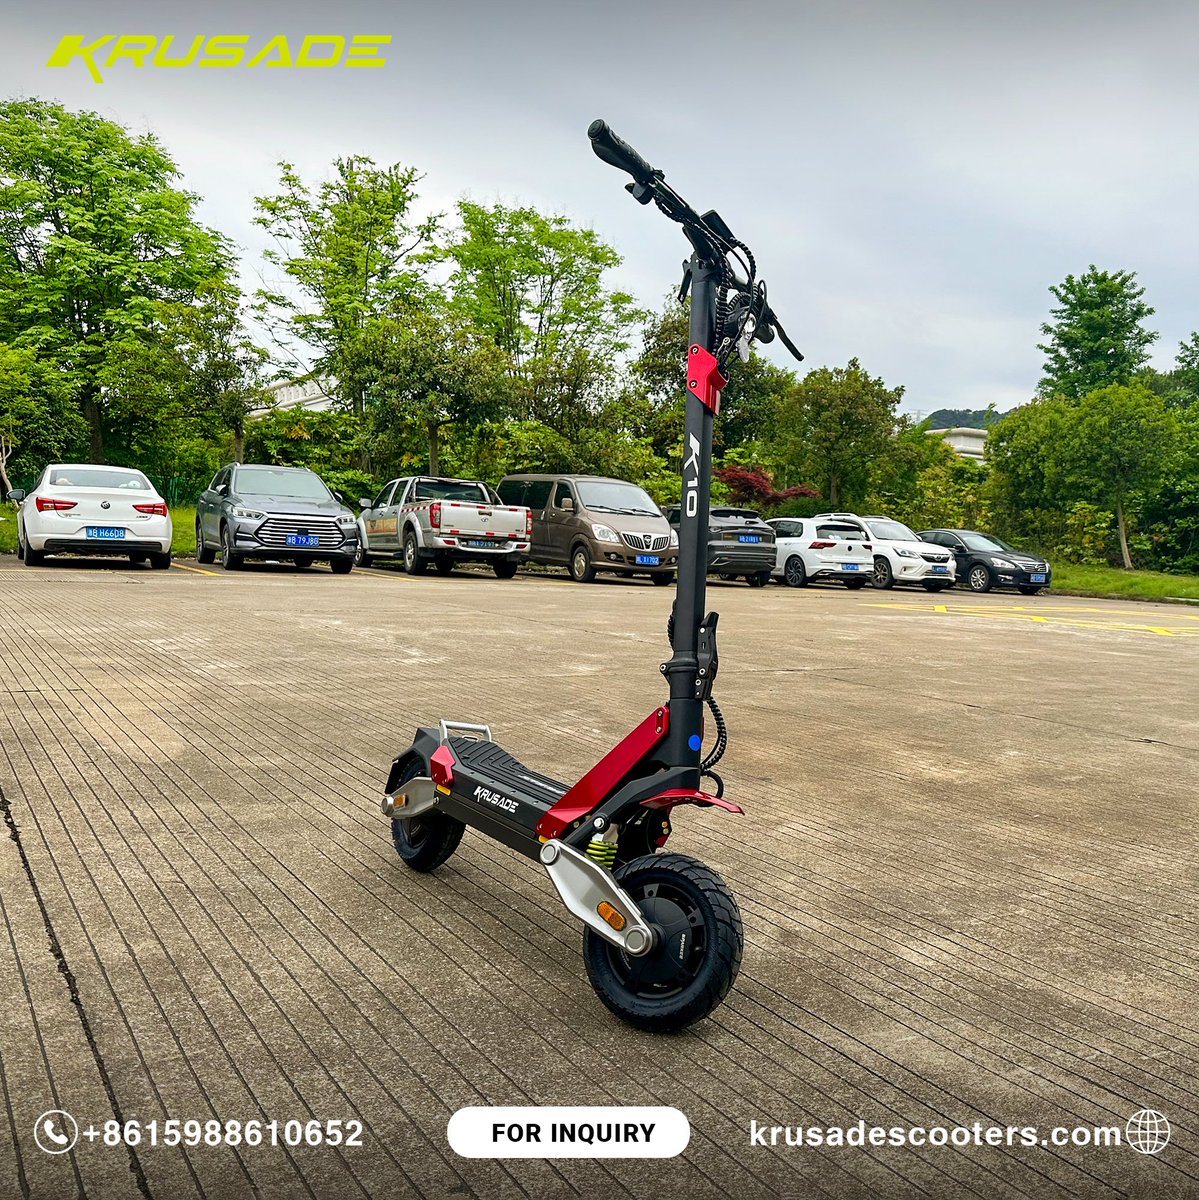 KRUSADE Scooters: The only eco friendly modern solution.⚡🛴

🌐 Explore more at krusadescooters.com

#KRUSADE #KRUSADEK10 #KRUSADEK10+ #KRUSADEK10GT #SPARKEEScooter #KRUSADEScooter #Electricscooter #Electricscooters #Electricmobility #Escooter #EcoFriendlyScooter